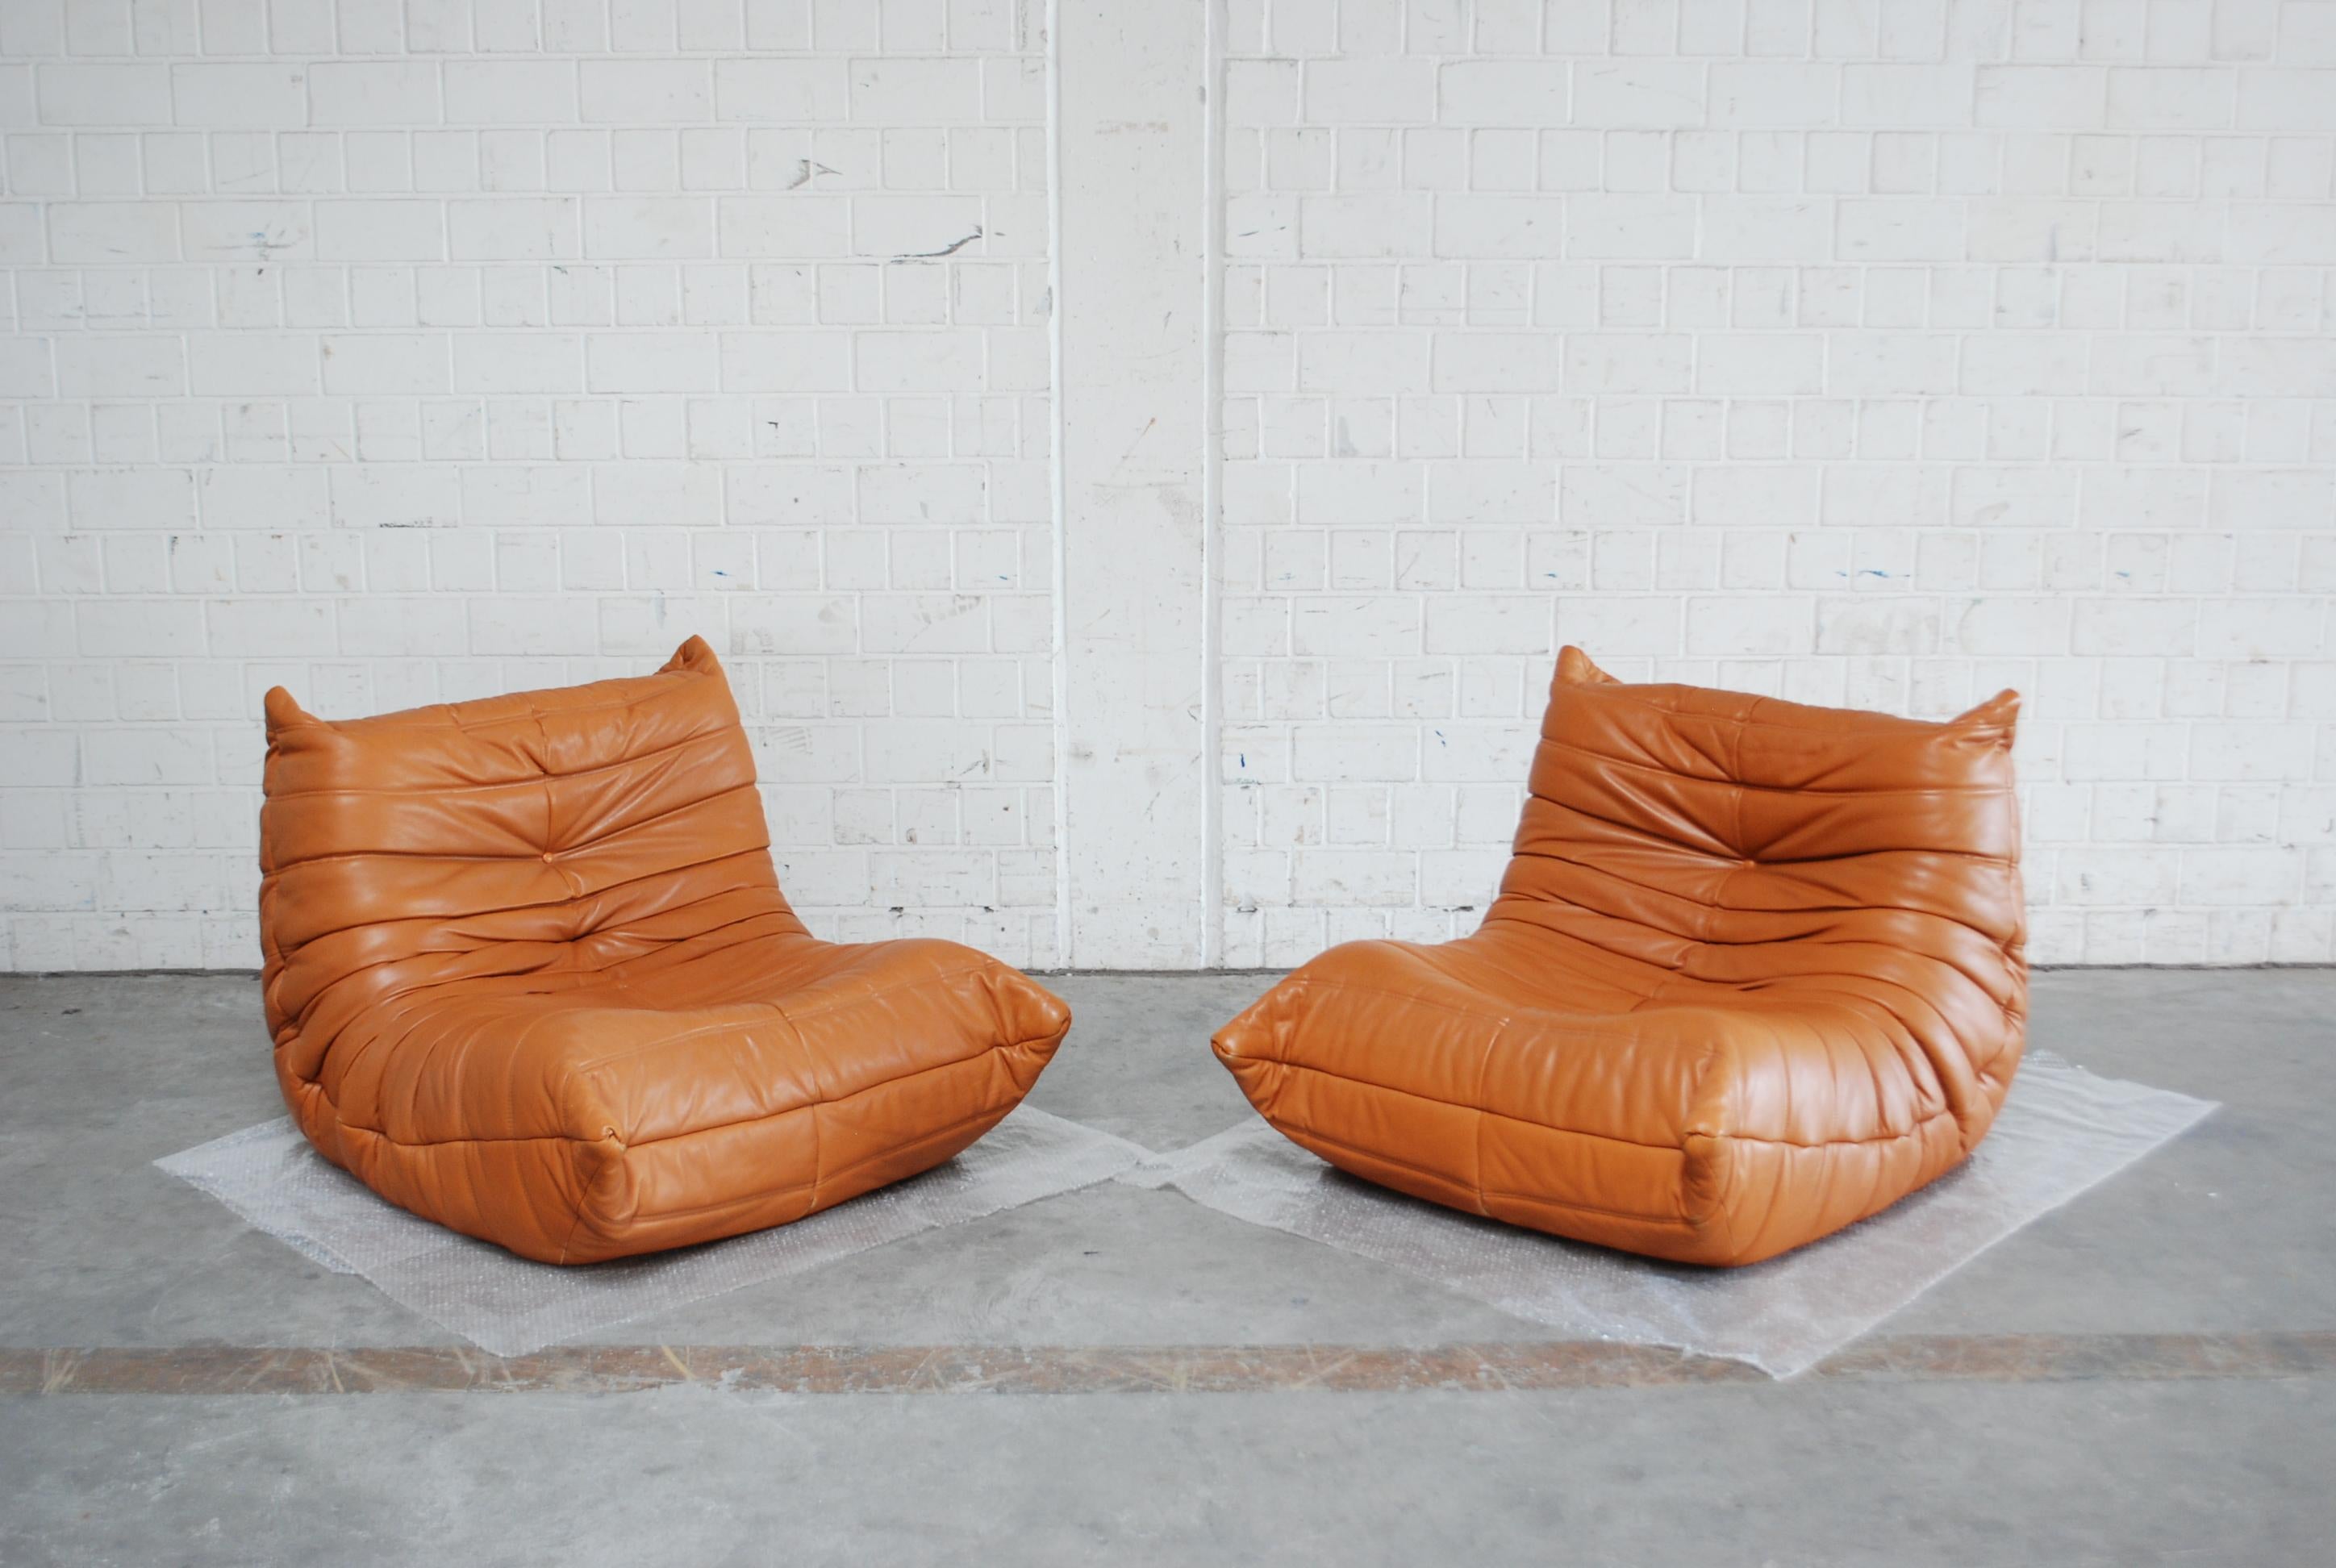 Ligne Roset Model Togo in cognac brandy soft premium aniline leather.
Design by Michel Ducaroy.
Original leather.
From the late 1980s.
In a great condition. Hard to find this beautiful leather in this condition.
Set of 2.
 